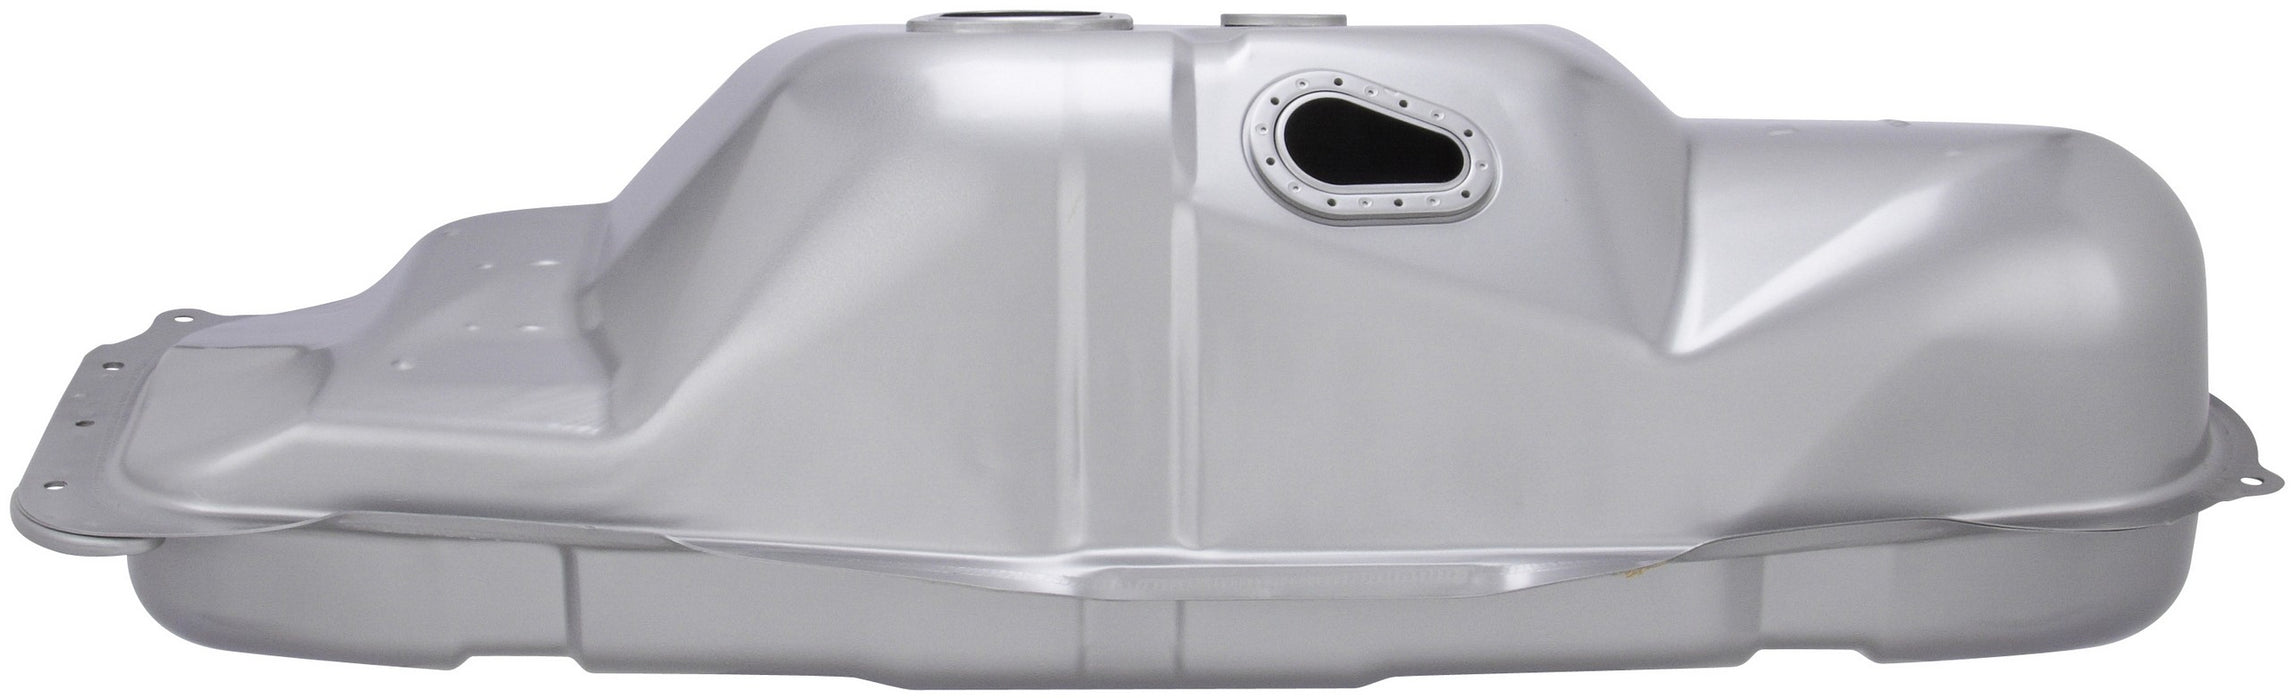 Fuel Tank for Toyota Tacoma Pre Runner 2000 1999 1998 1997 1996 1995 - Spectra TO31E